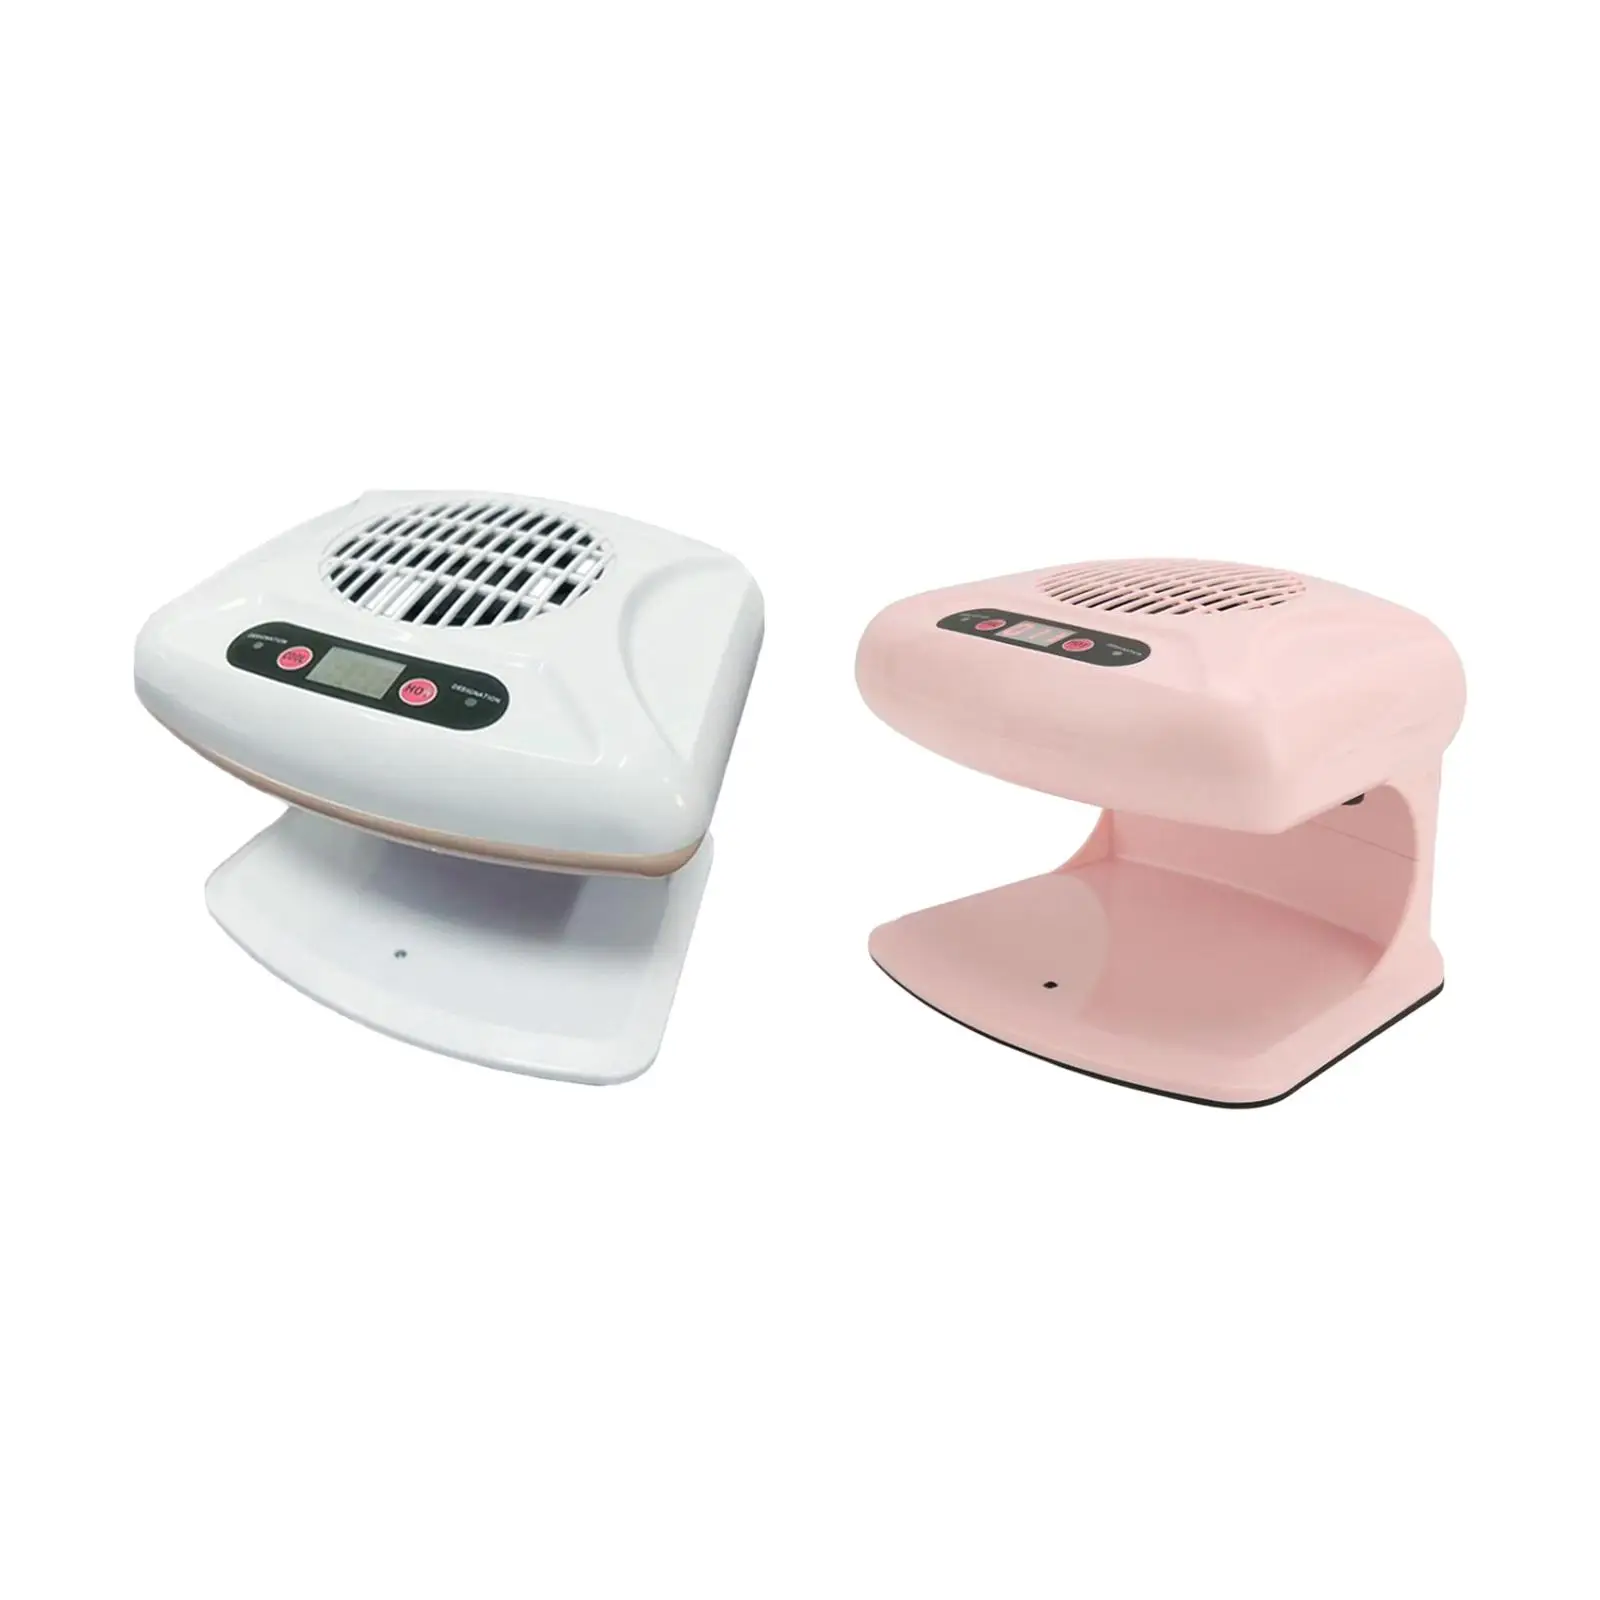 Air Nail Dryer Fan with Warm and cool wind Nail blow Dryer Machine for Fingernail Toenail Professional Salon and Home Use